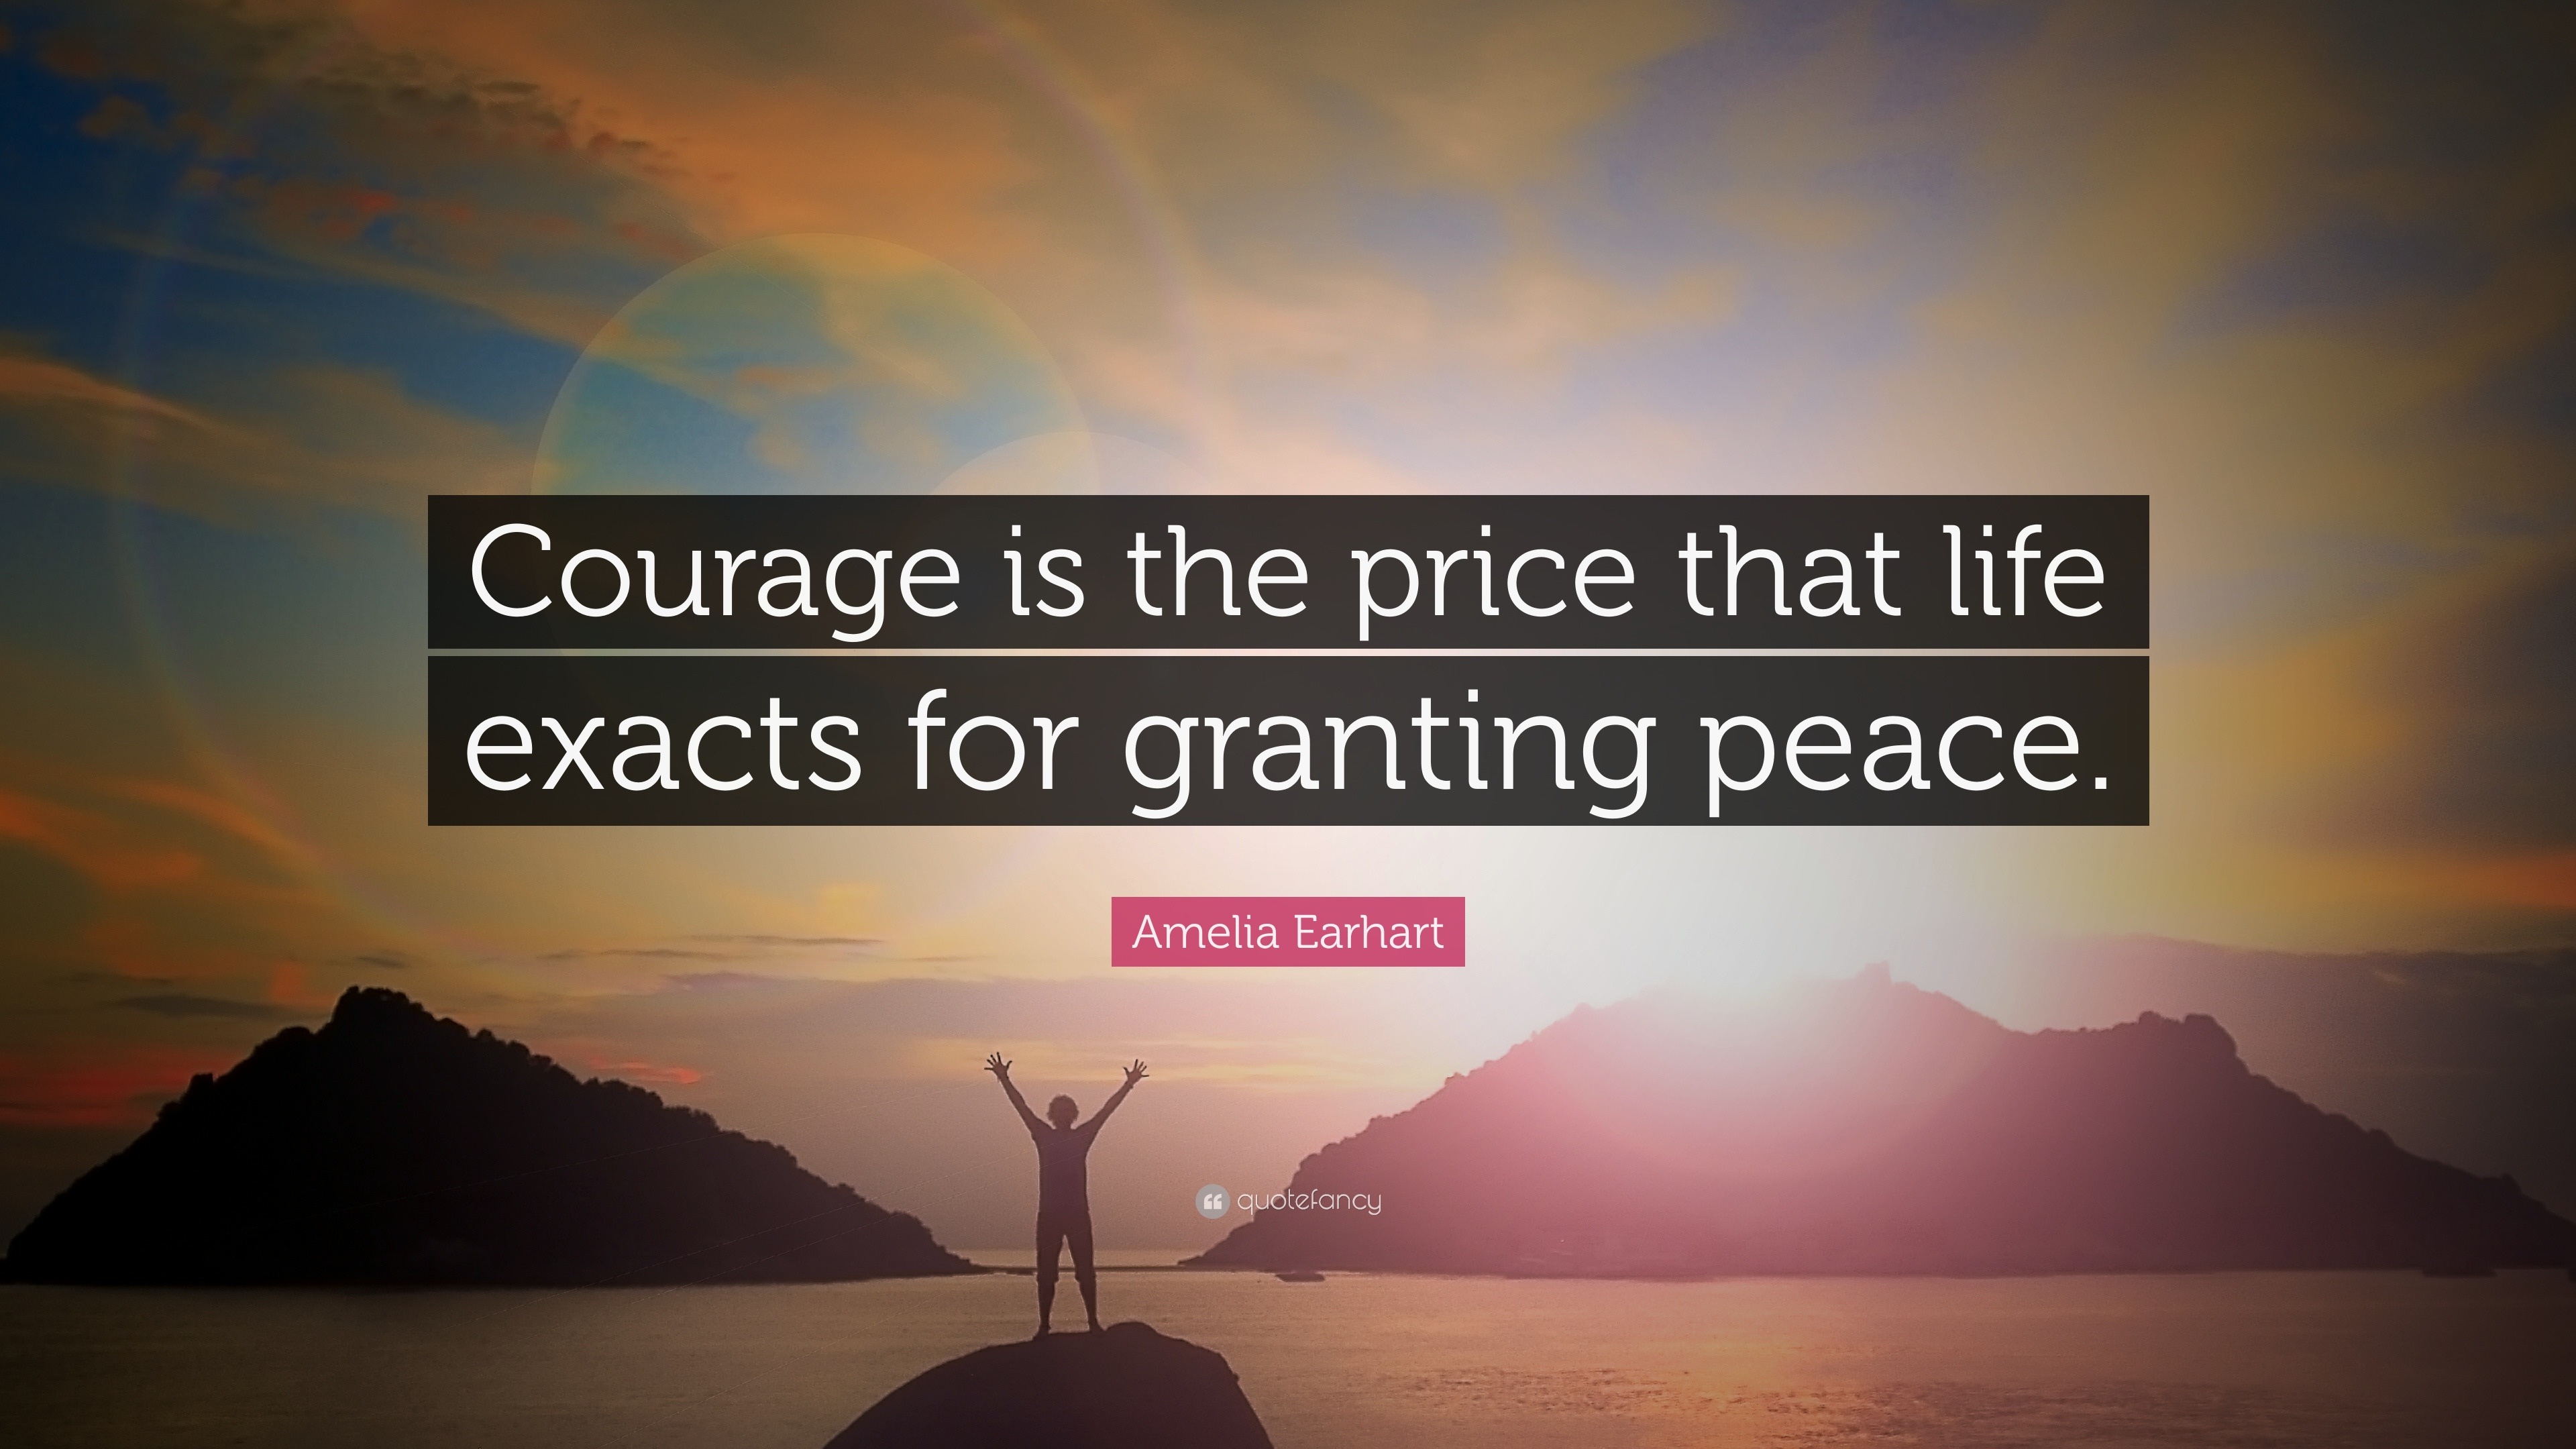 Amelia Earhart Quote: “Courage is the price that life exacts for